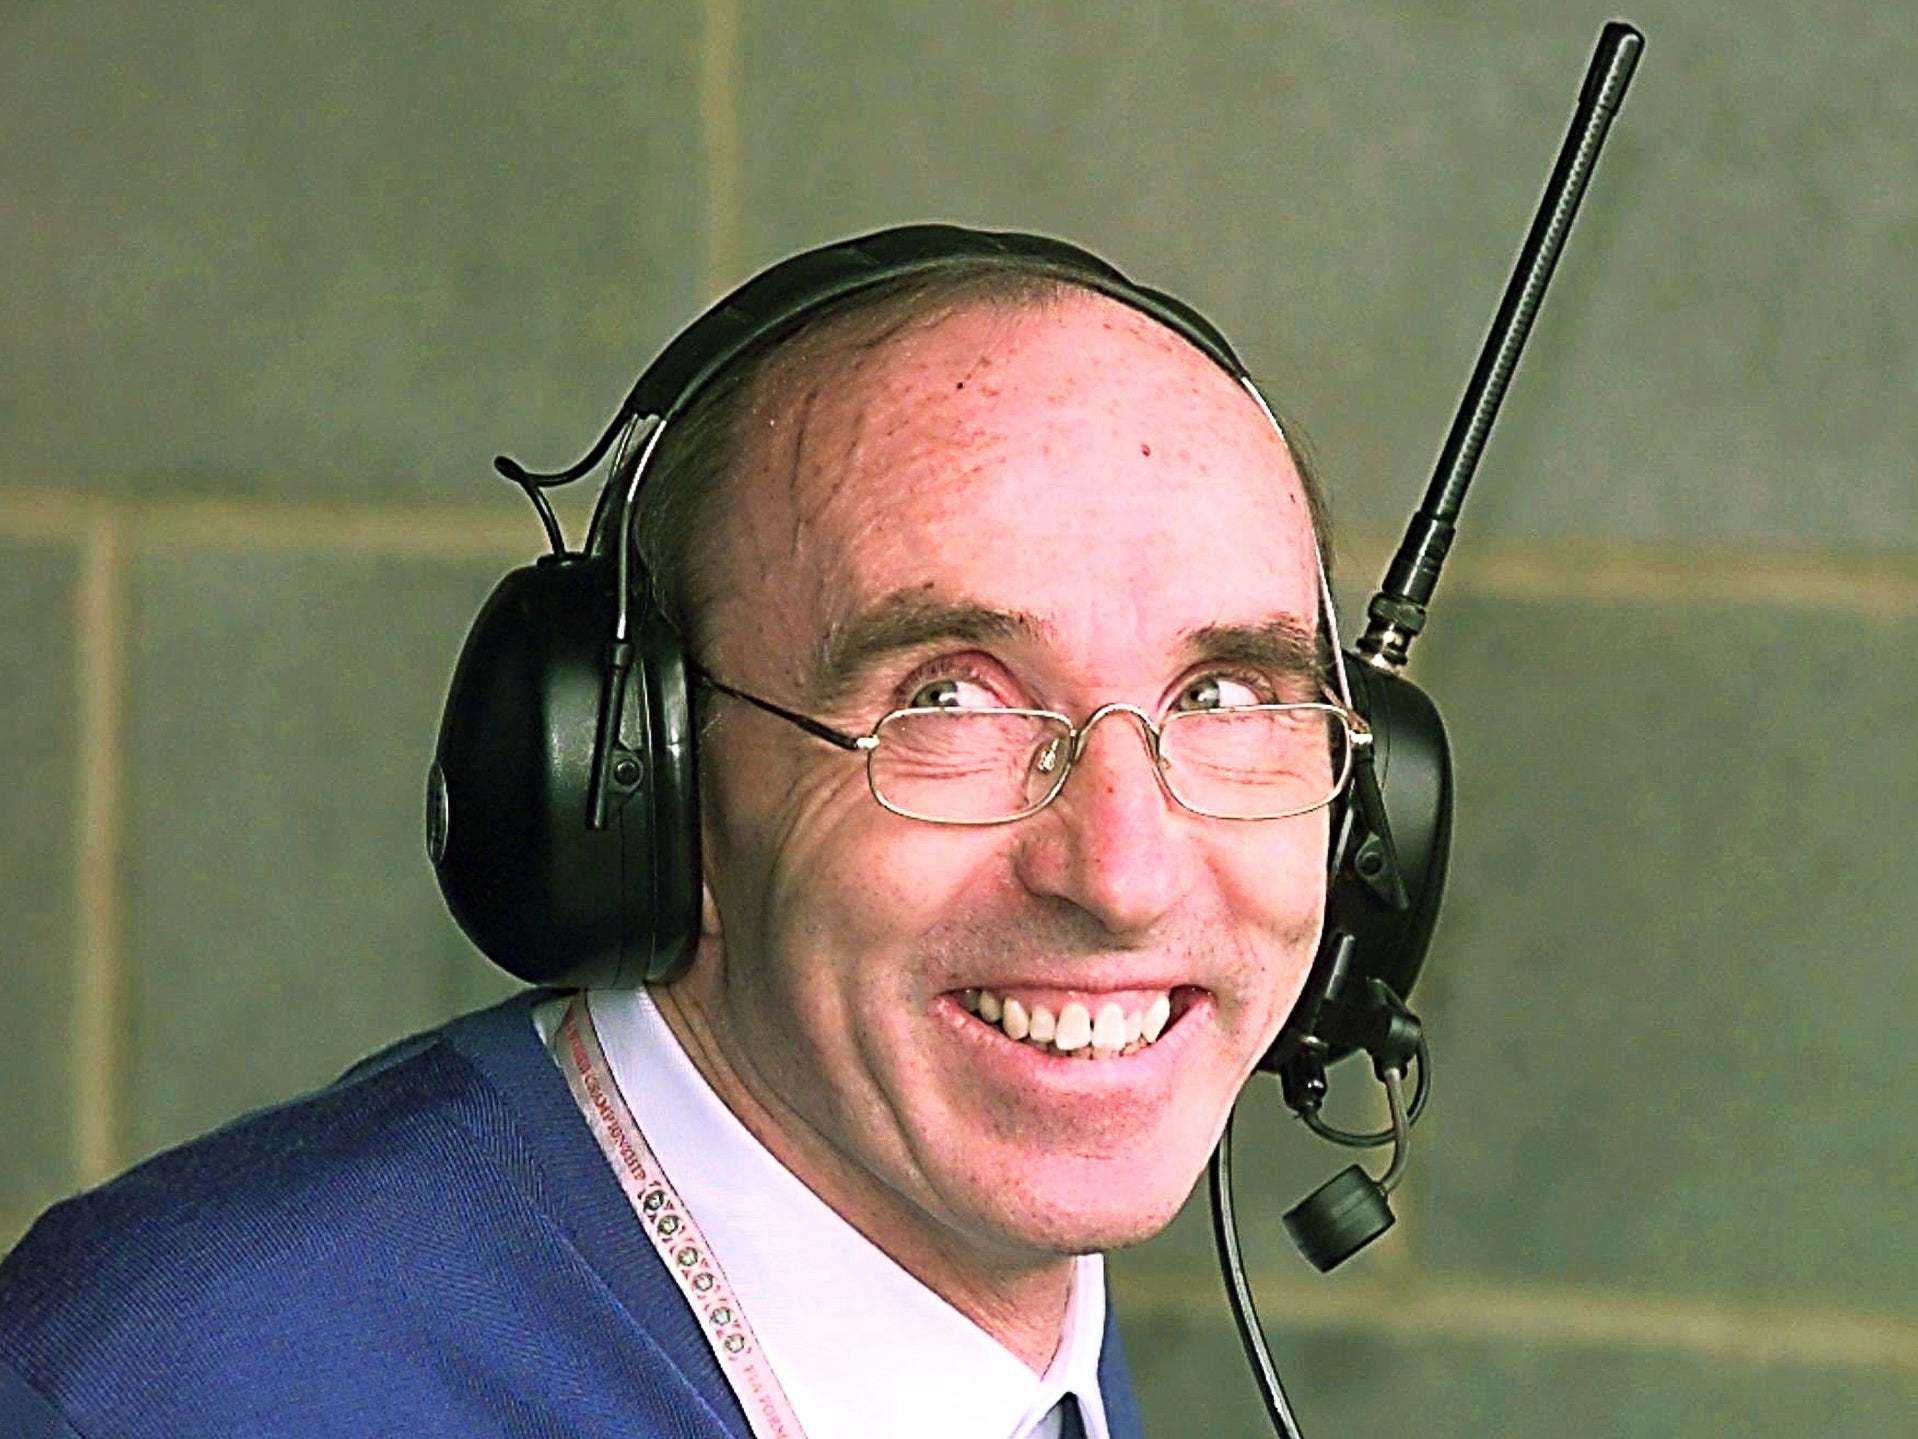 Sir Frank Williams has spent 43 years at the helm of the self-named British team